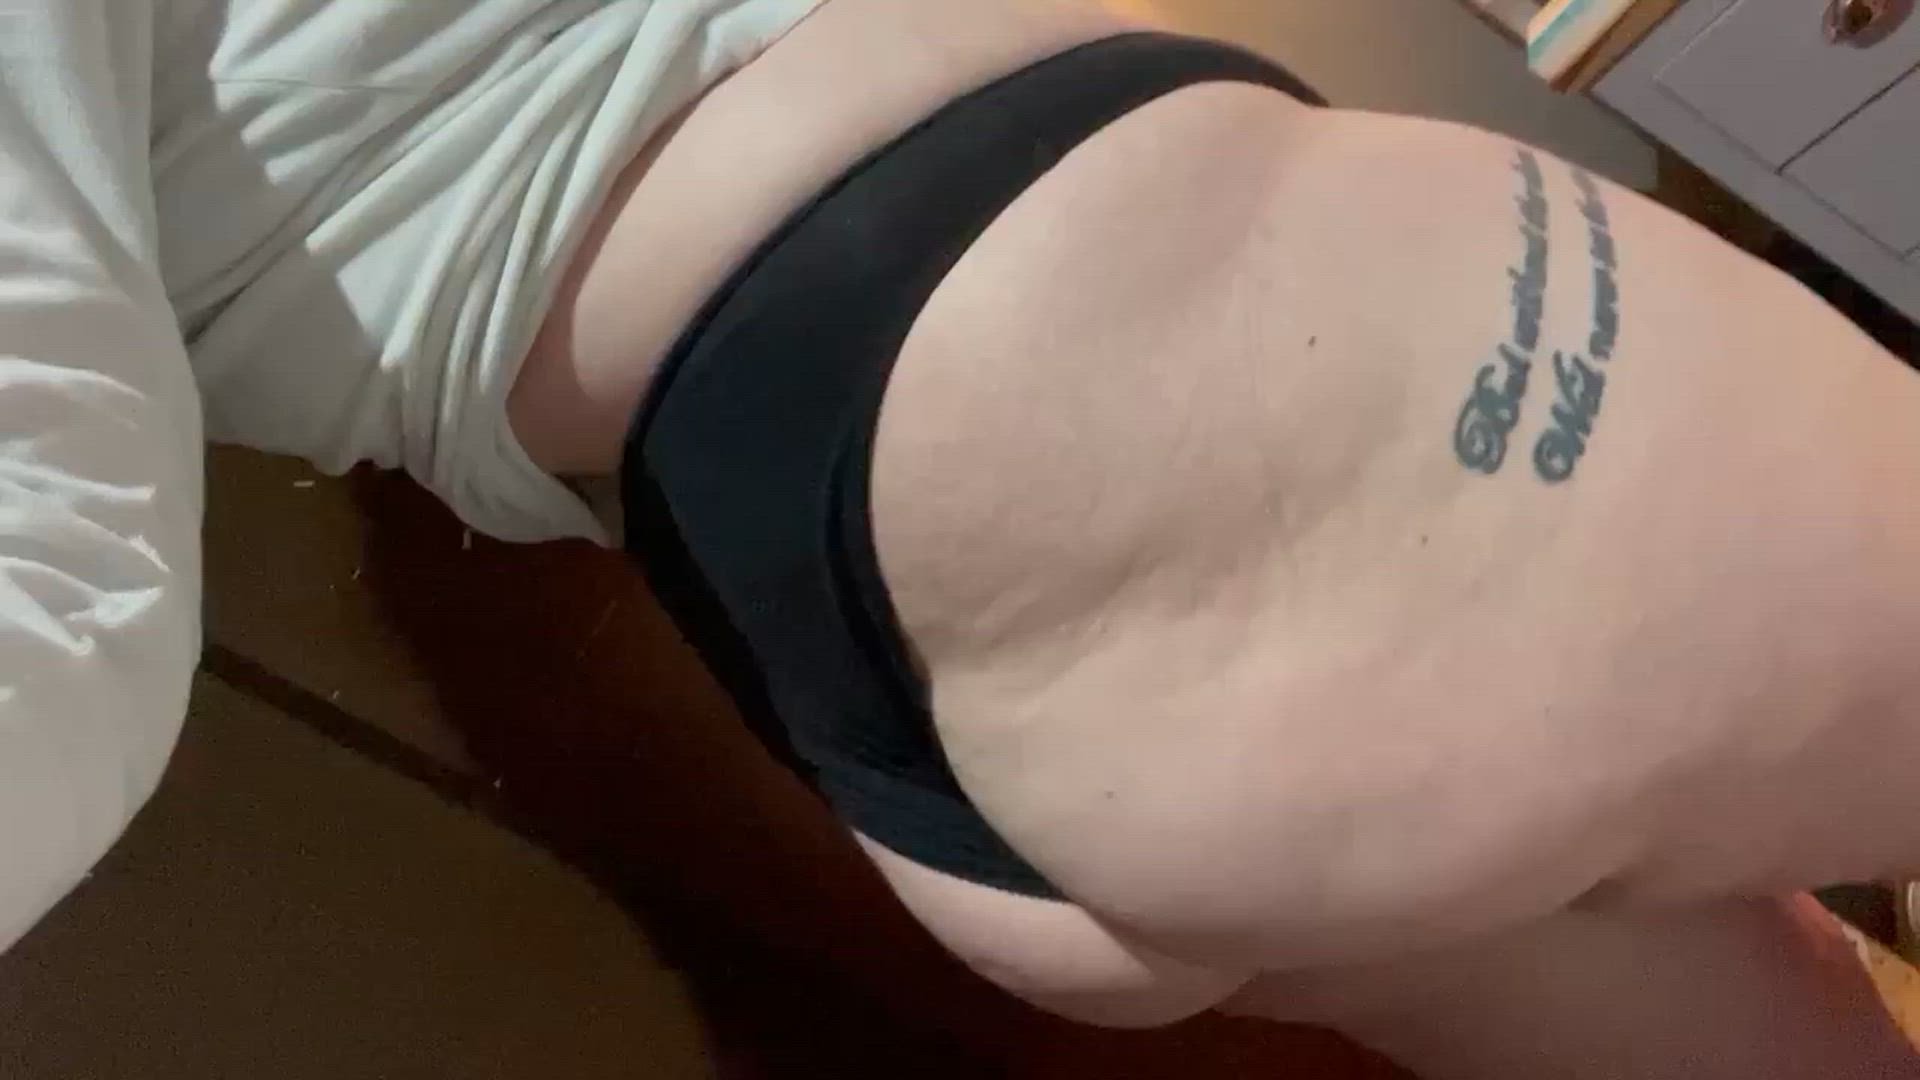 Ass porn video with onlyfans model jessie148 <strong>@jessie137</strong>